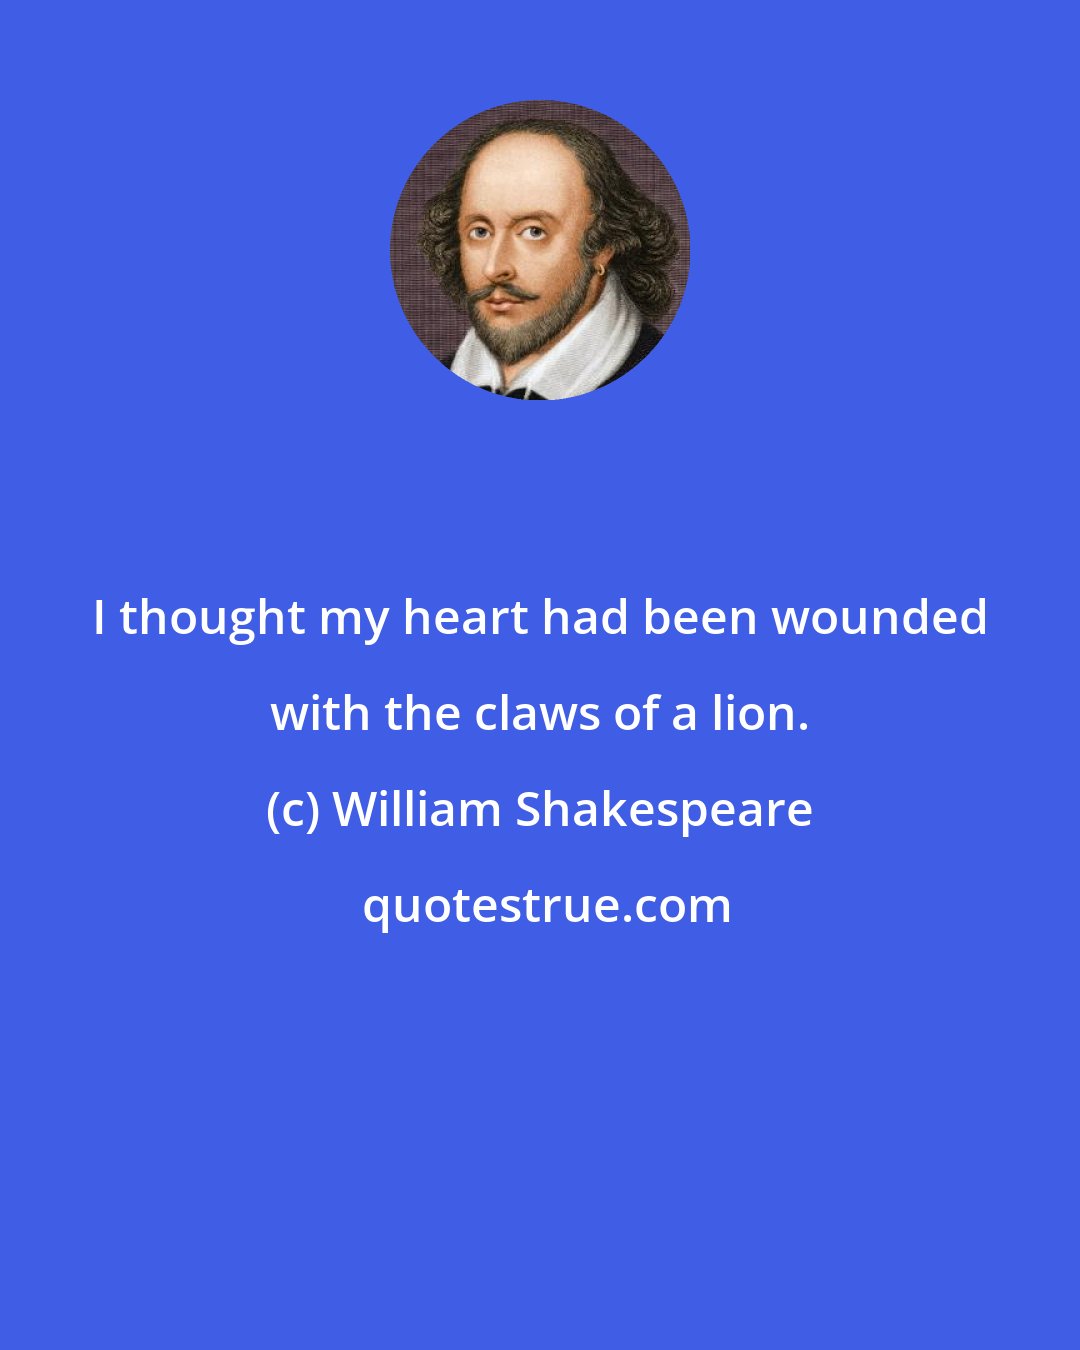 William Shakespeare: I thought my heart had been wounded with the claws of a lion.